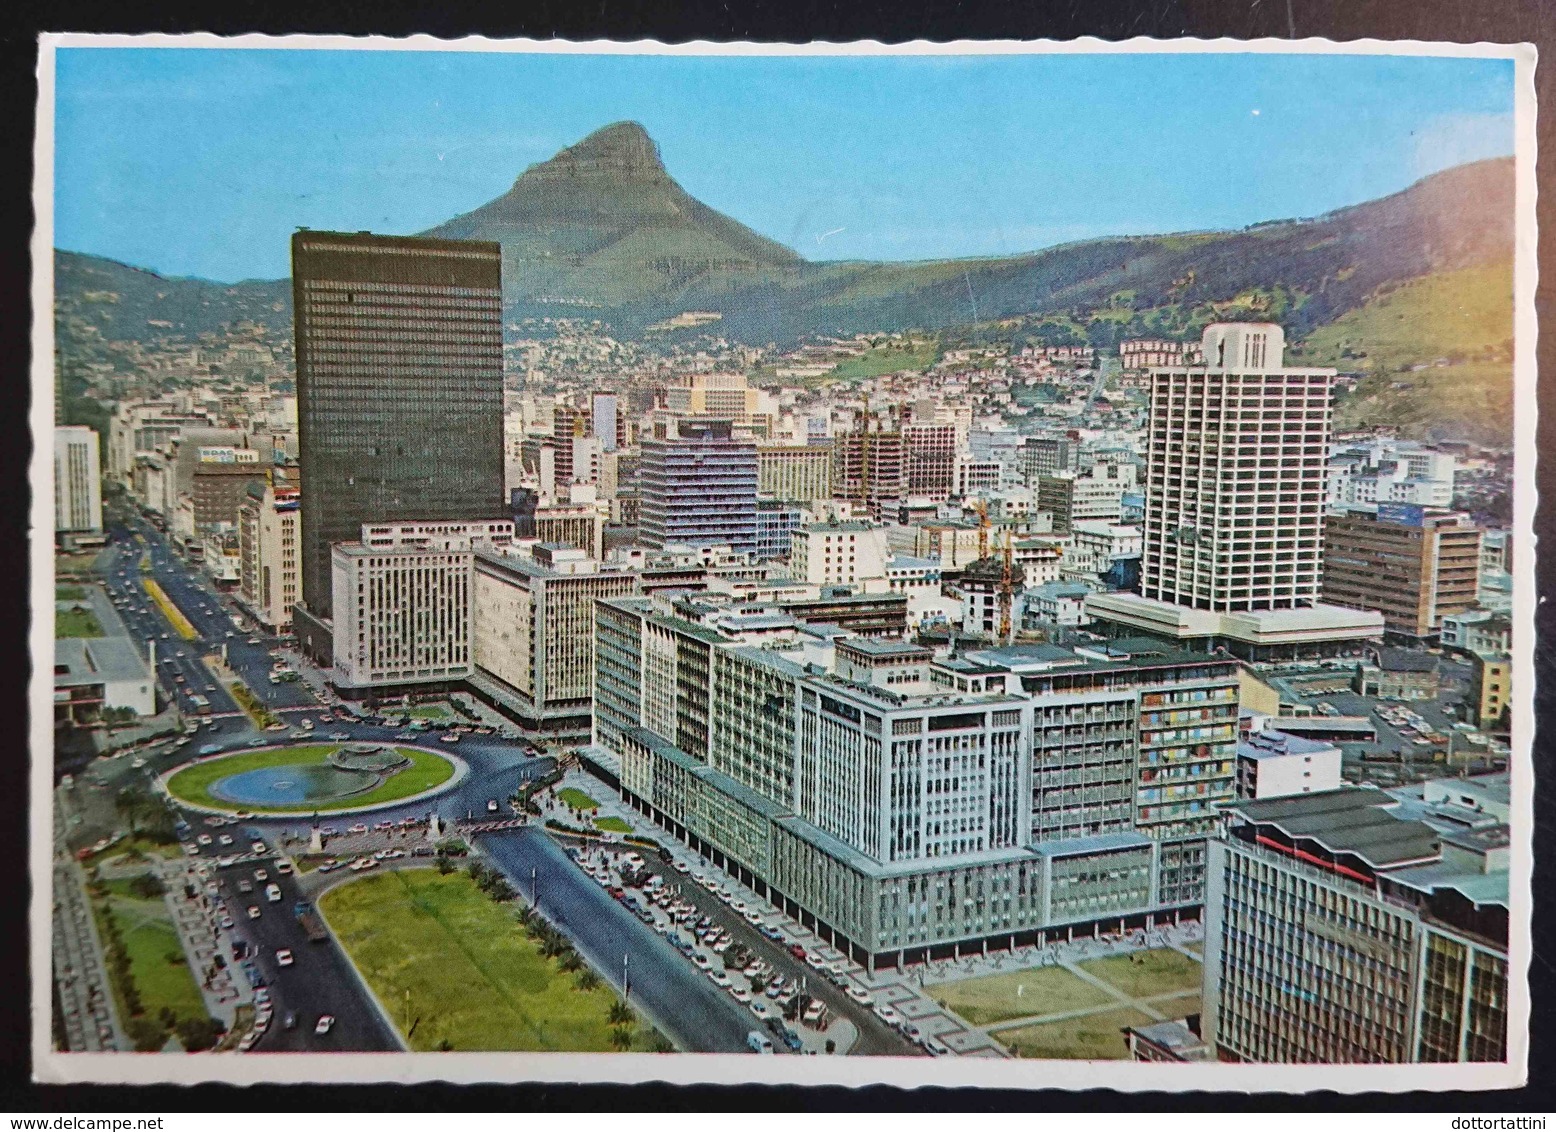 CAPE TOWN / KAAPSTAD - South Africa - An Imposing View Of Adderley Street And City Center -  Vg - South Africa